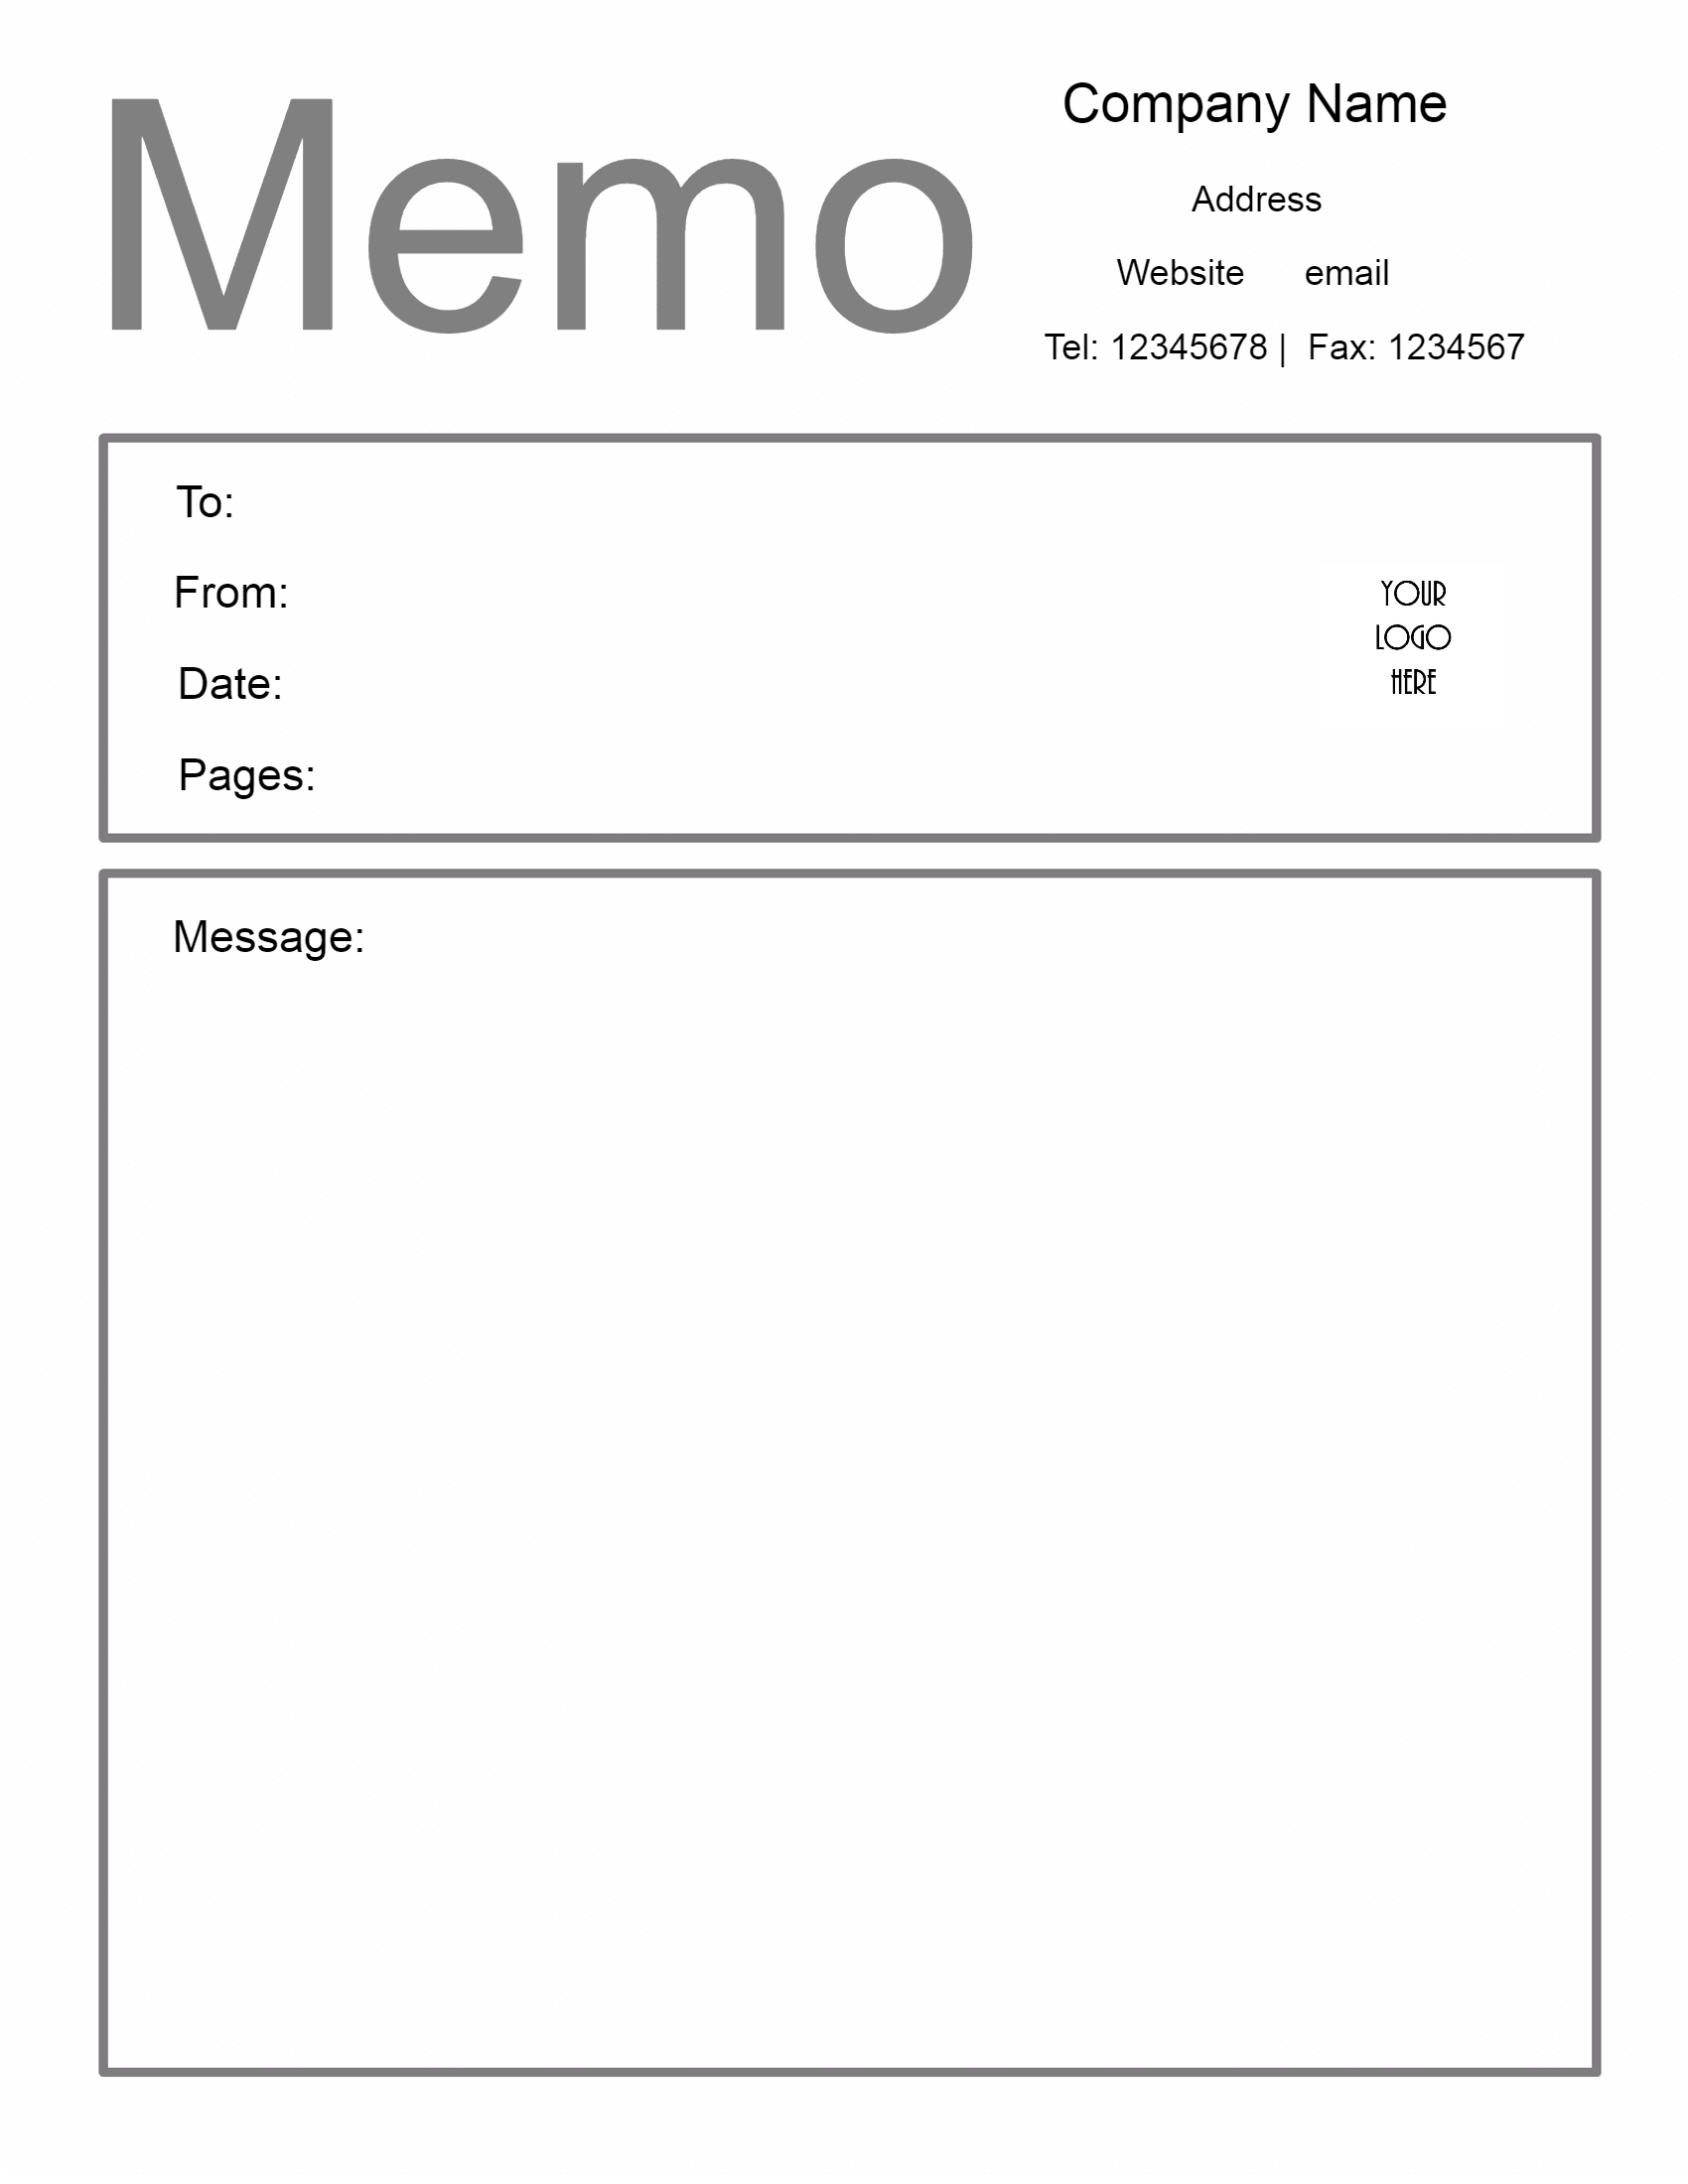 Free Memo Template For Word from bazarpowerful.weebly.com